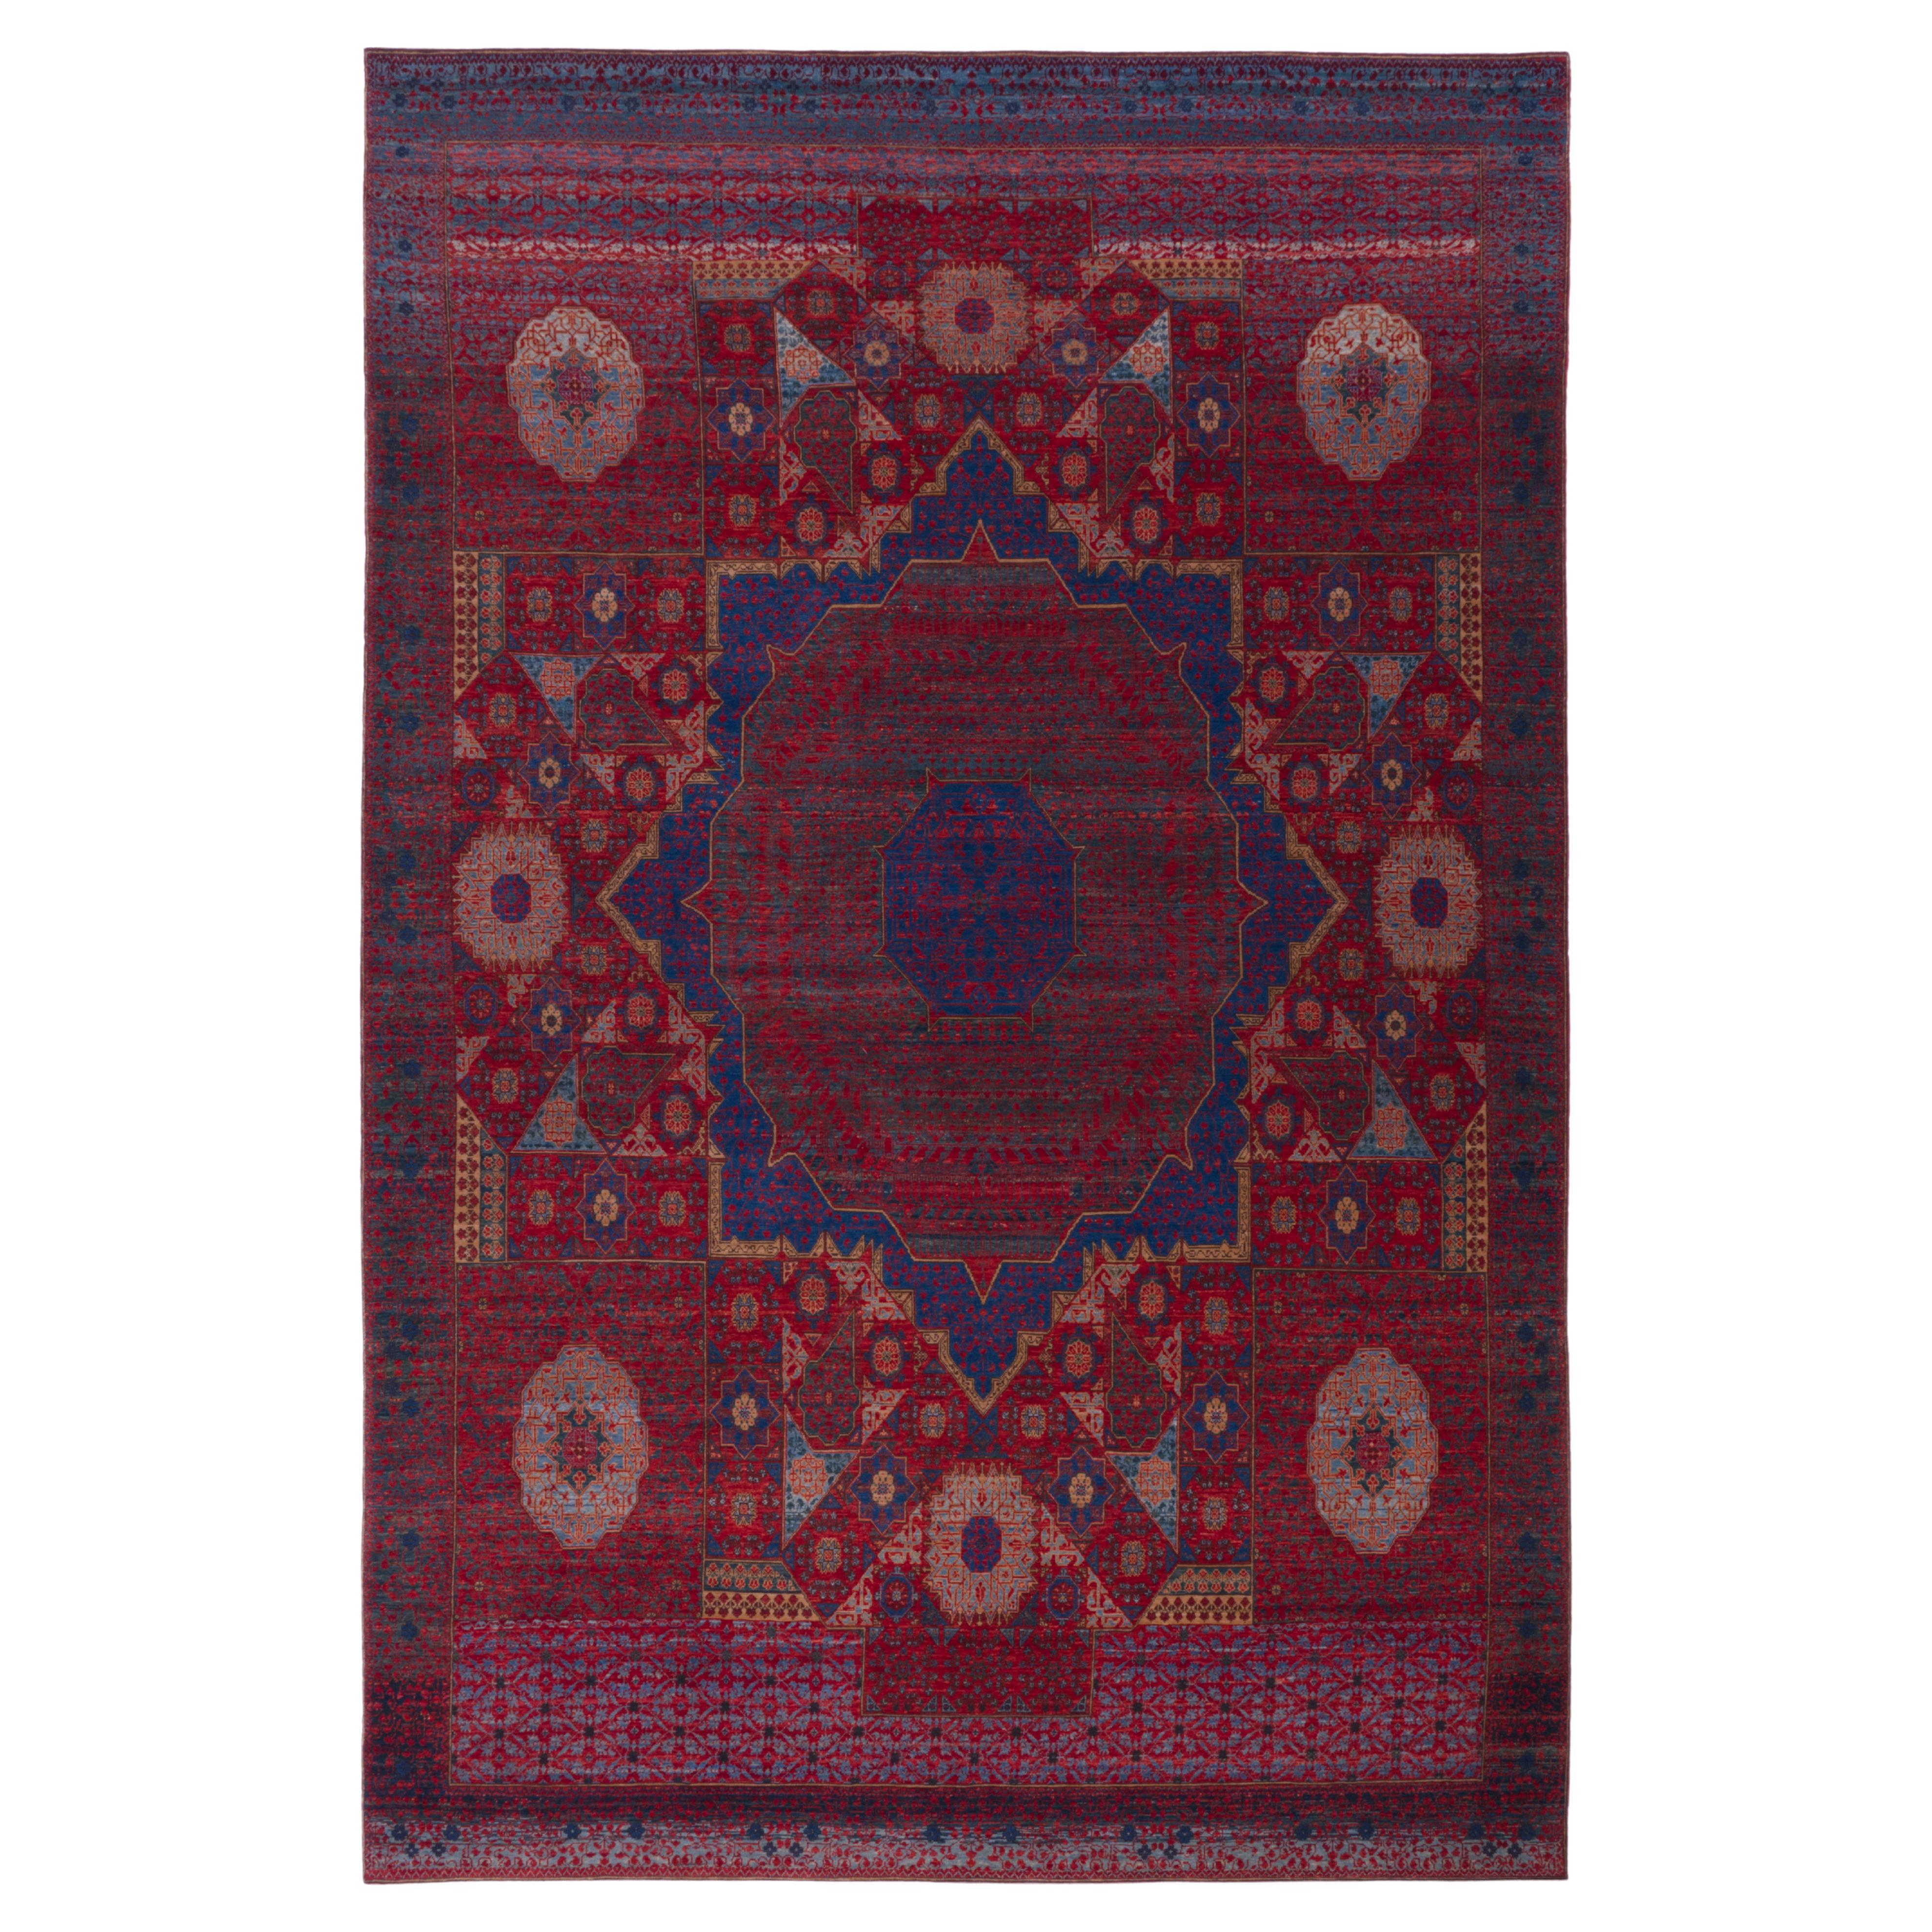 Ararat Rugs Mamluk Carpet with Central Star 16th Century Revival - Natural Dyed For Sale